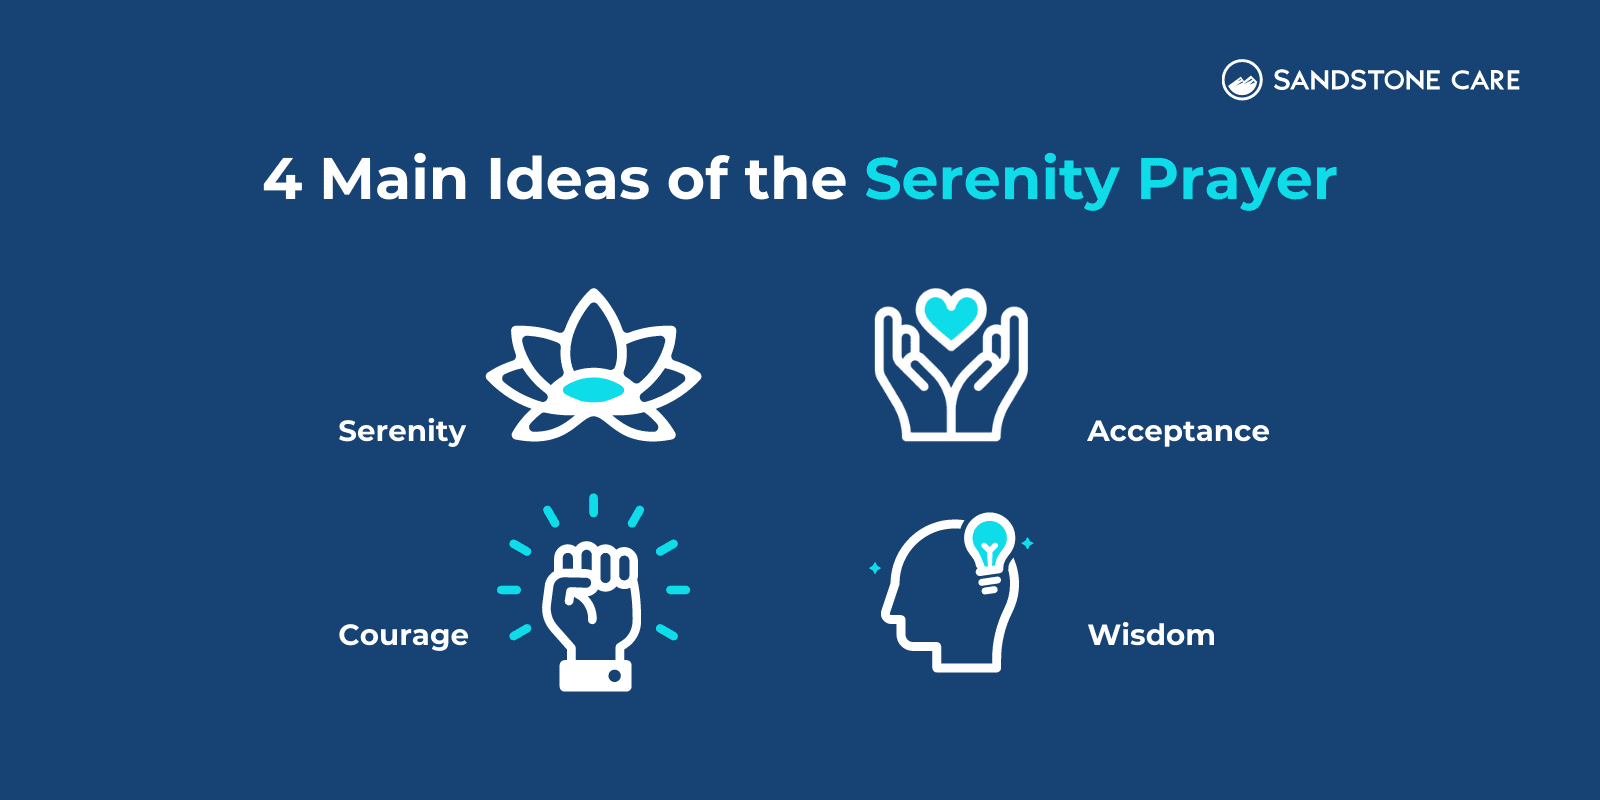 4 main ideas of the serenity prayer and relevant icons of each 4 ideas of the serenity prayer: serenity, acceptance, courage, and wisdom